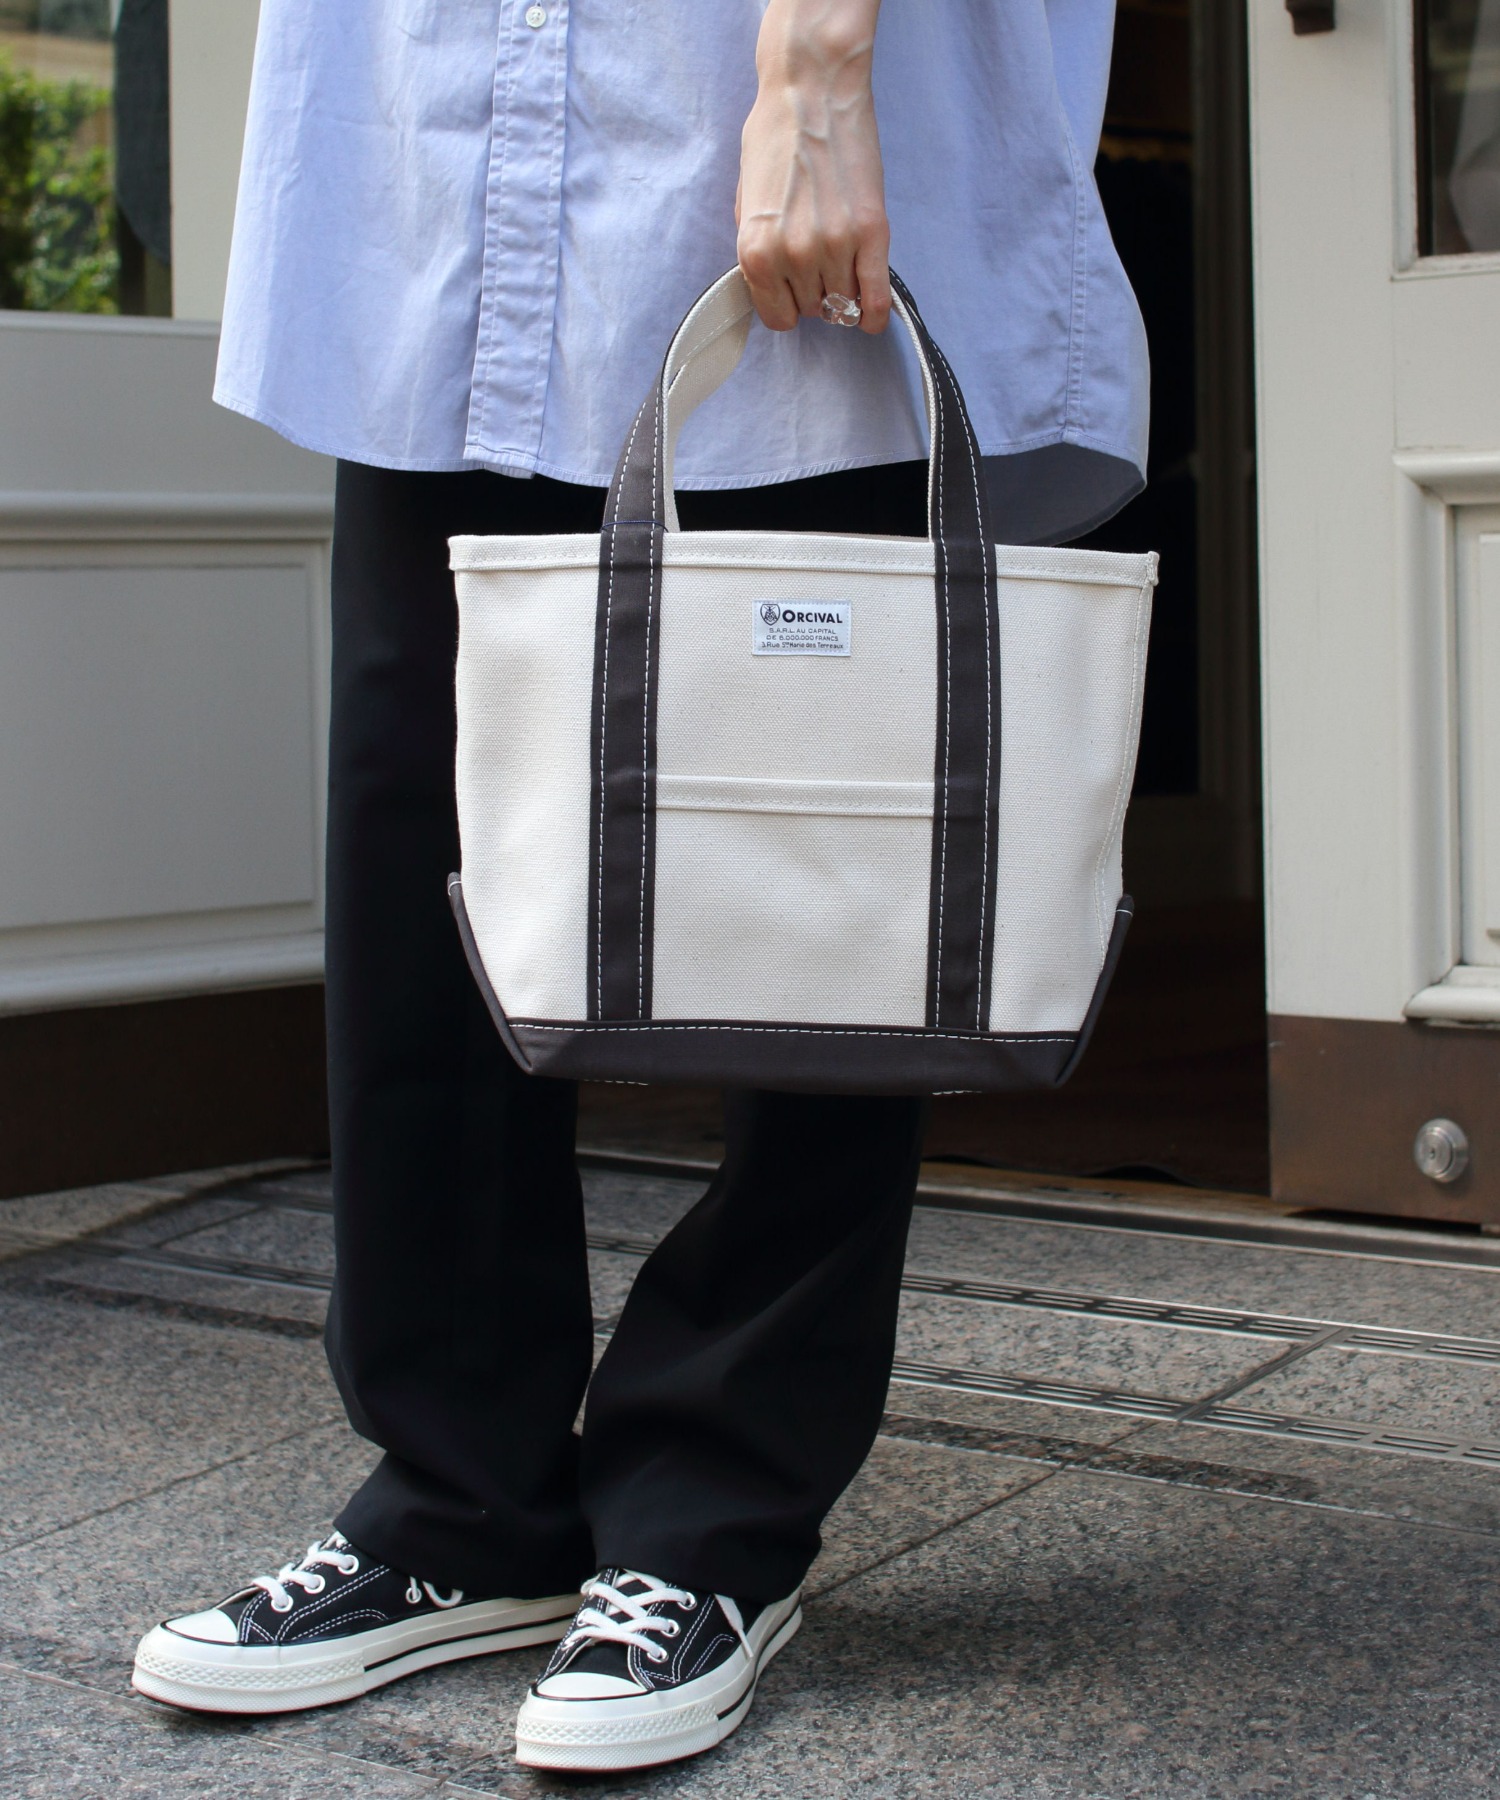 ORCIVAL/オーシバル　トートバッグ TOTE BAG 2TONE RC-7060HVC 22AW